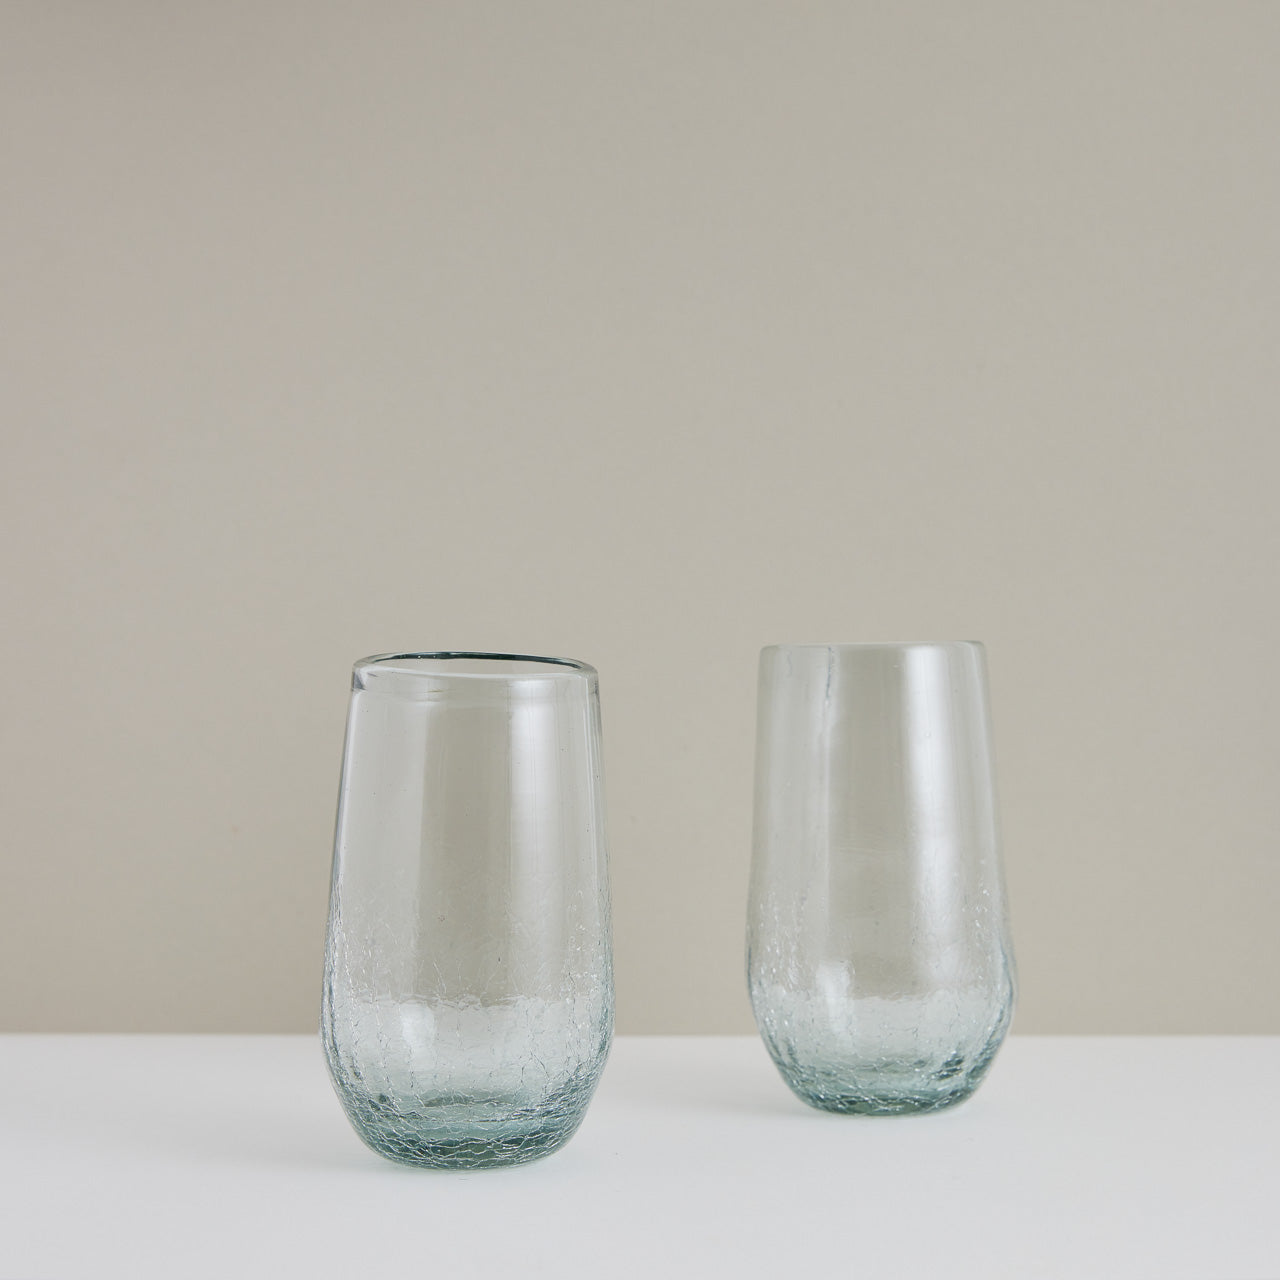 A pair of handblown Mexican cocktail flutes made in Mexico.